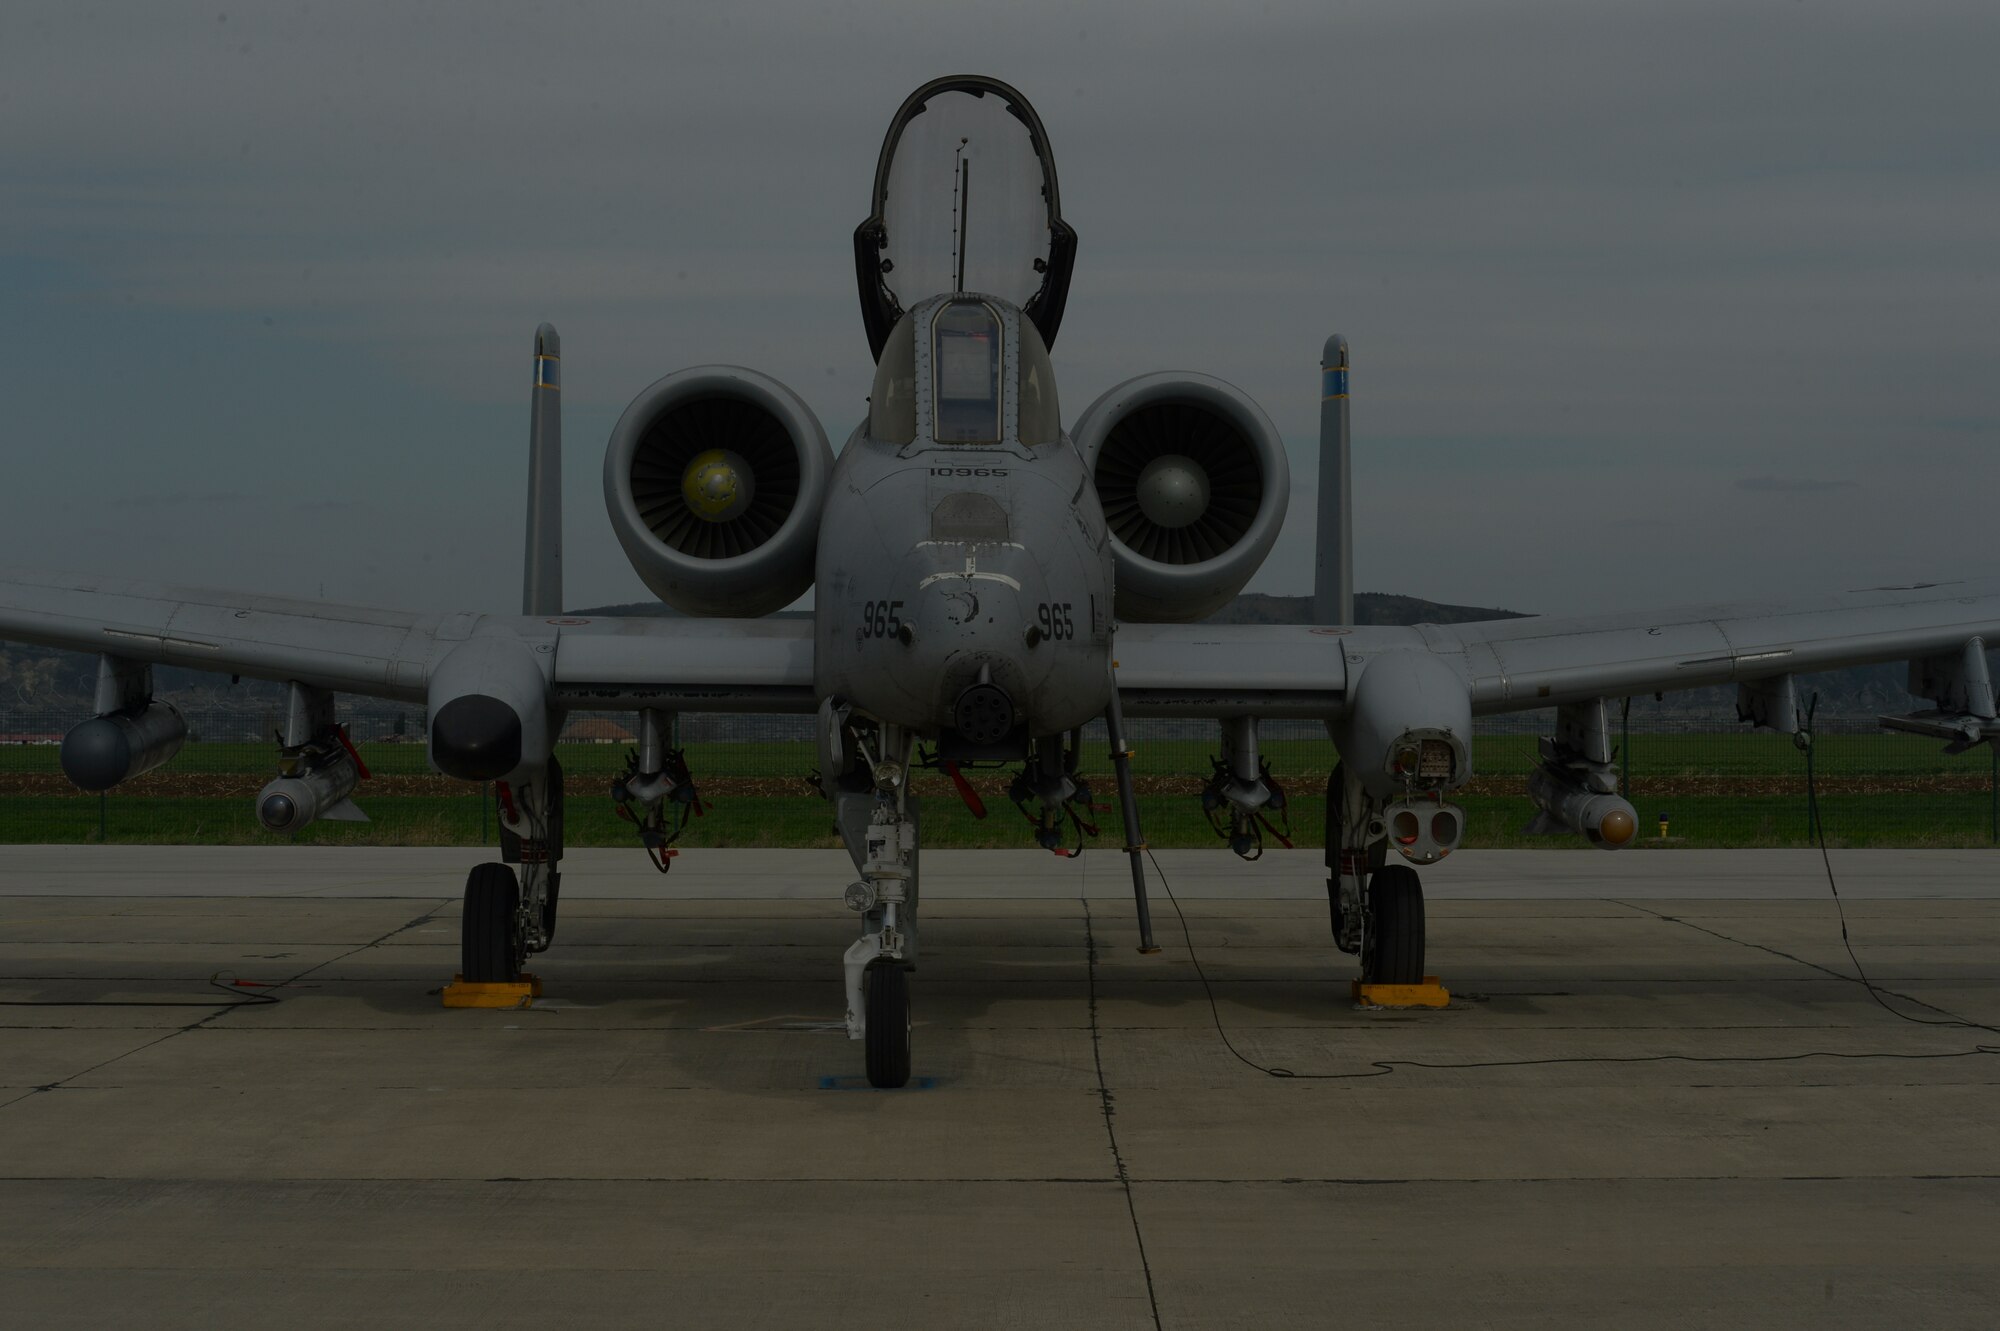 A U.S. Air Force A-10 Thunderbolt II assigned to the 354th Expeditionary Fighter Squadron is parked off the runway during a theater security package deployment at Campia Turzii, Romania, April 14, 2015. The A-10 supports Air Force missions around the world as part of the U.S. Air Force's current inventory of strike platforms, including F-15 Eagle and F-16 Fighting Falcon fighter aircraft. (U.S. Air Force photo by Staff Sgt. Joe W. McFadden/Released)